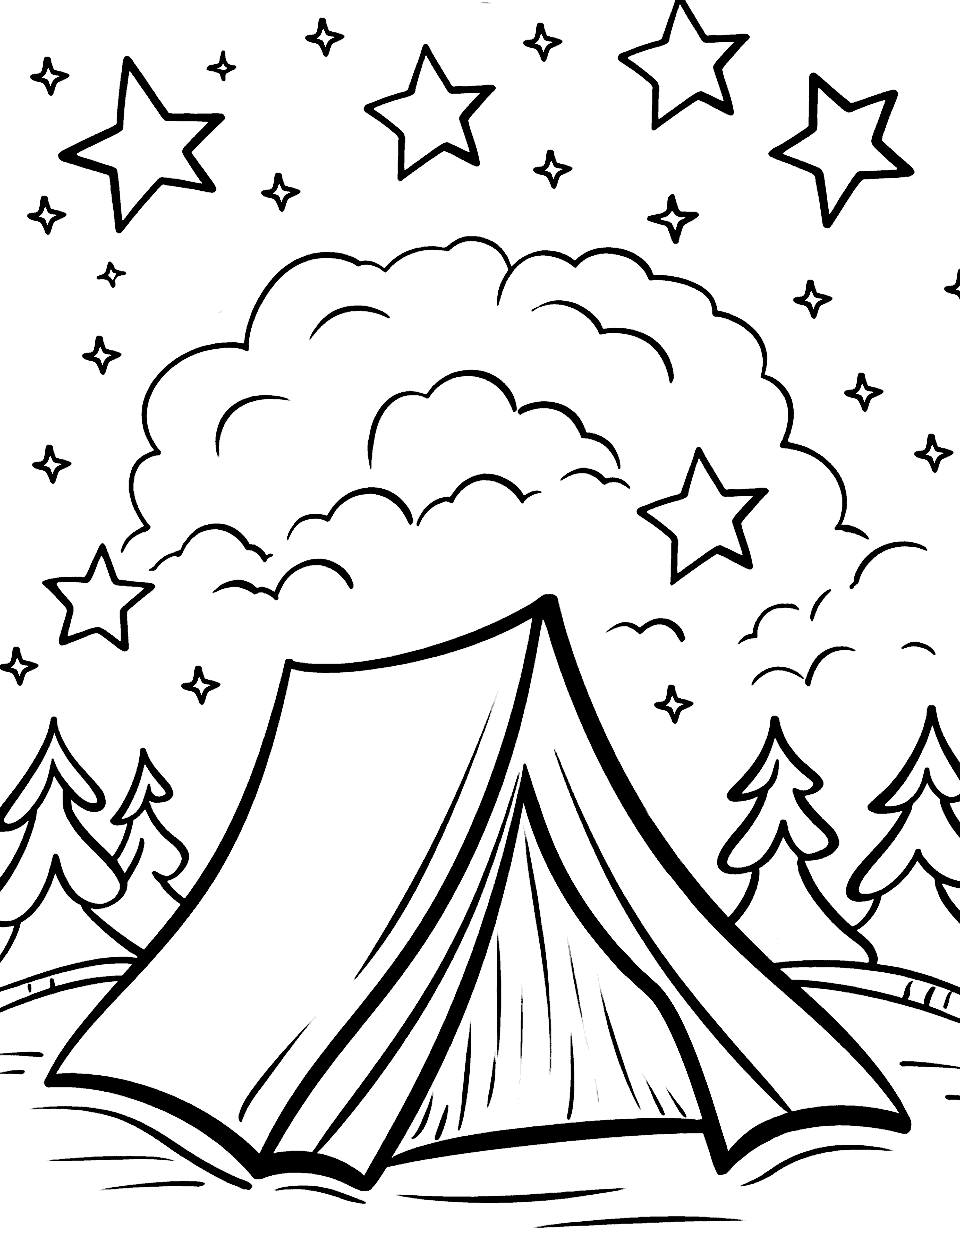 Starry Night Camping Star Coloring Page - A tent under a star-filled sky in the wilderness.